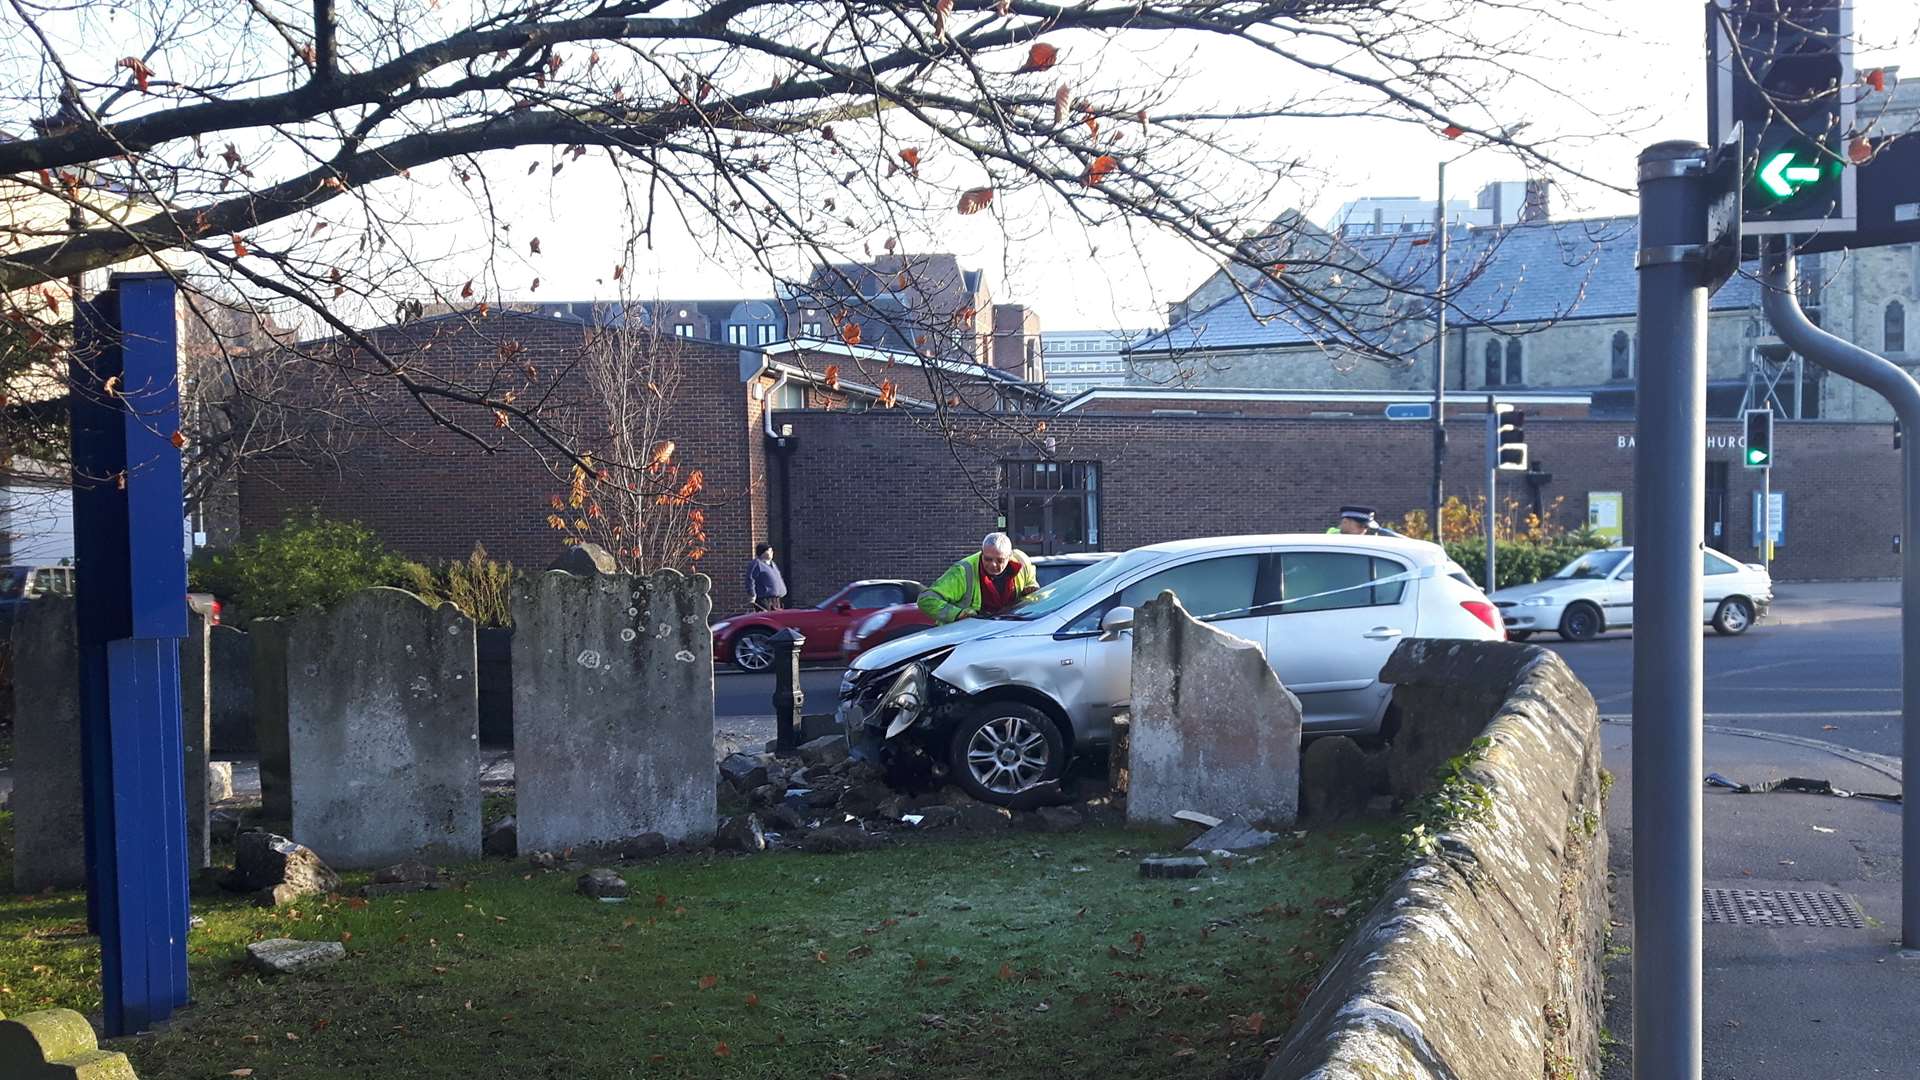 The scene of a crash at the graveyard at All Saints Church, Maidstone, where a car ploughed into the memorials